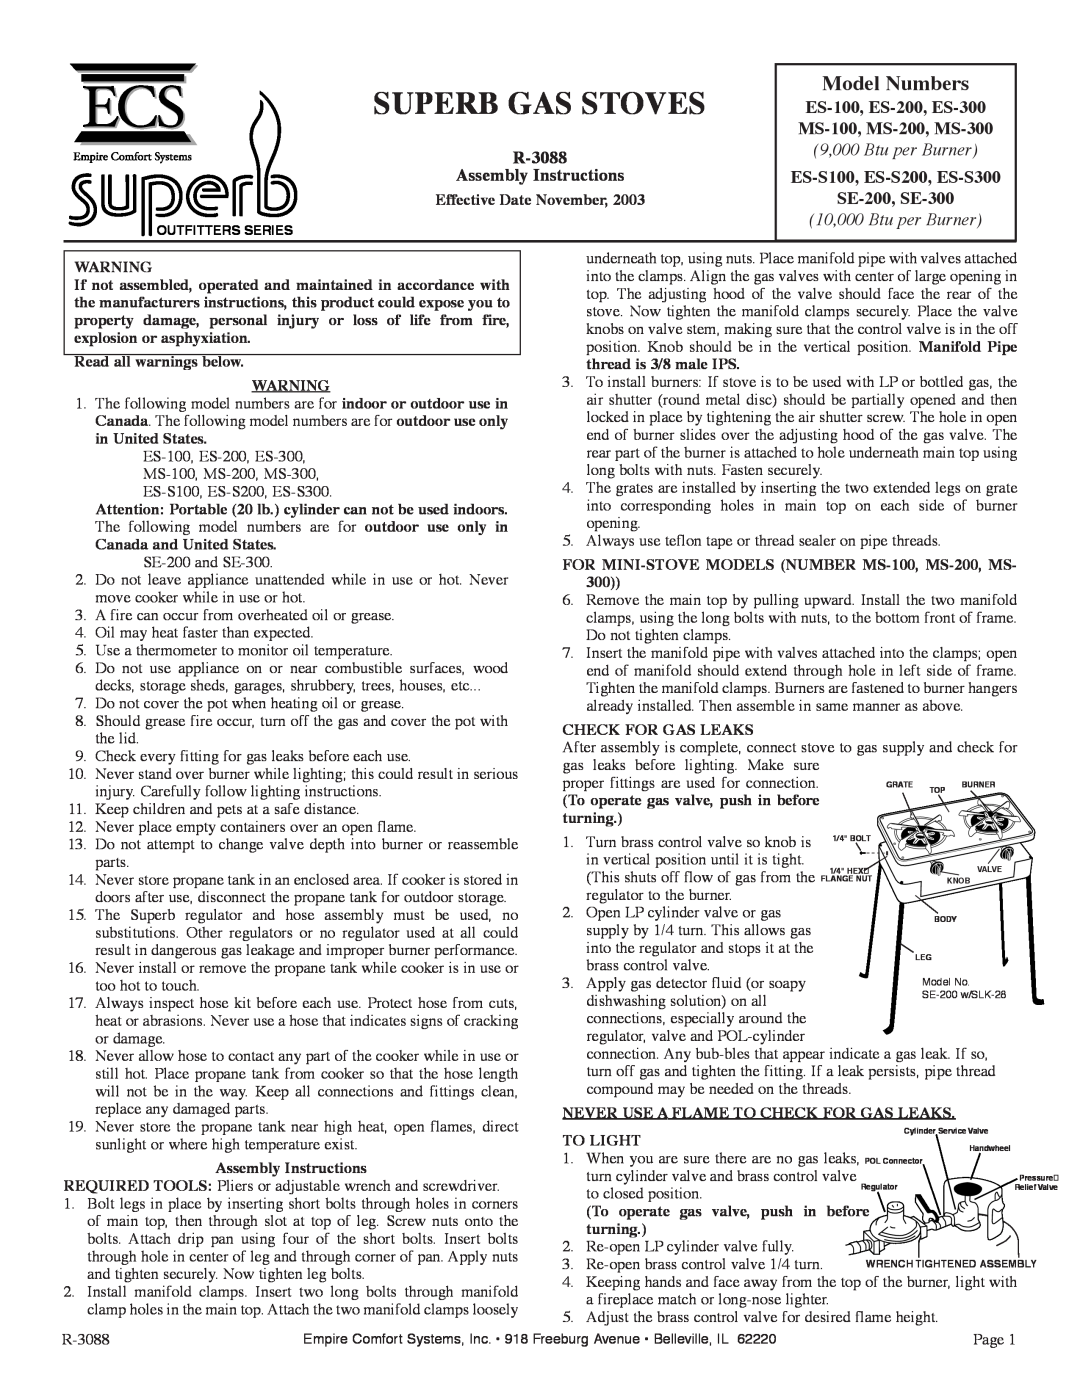 Empire Comfort Systems manual Model Numbers, R-3088 Assembly Instructions, ES-S100, ES-S200, ES-S300 SE-200, SE-300 